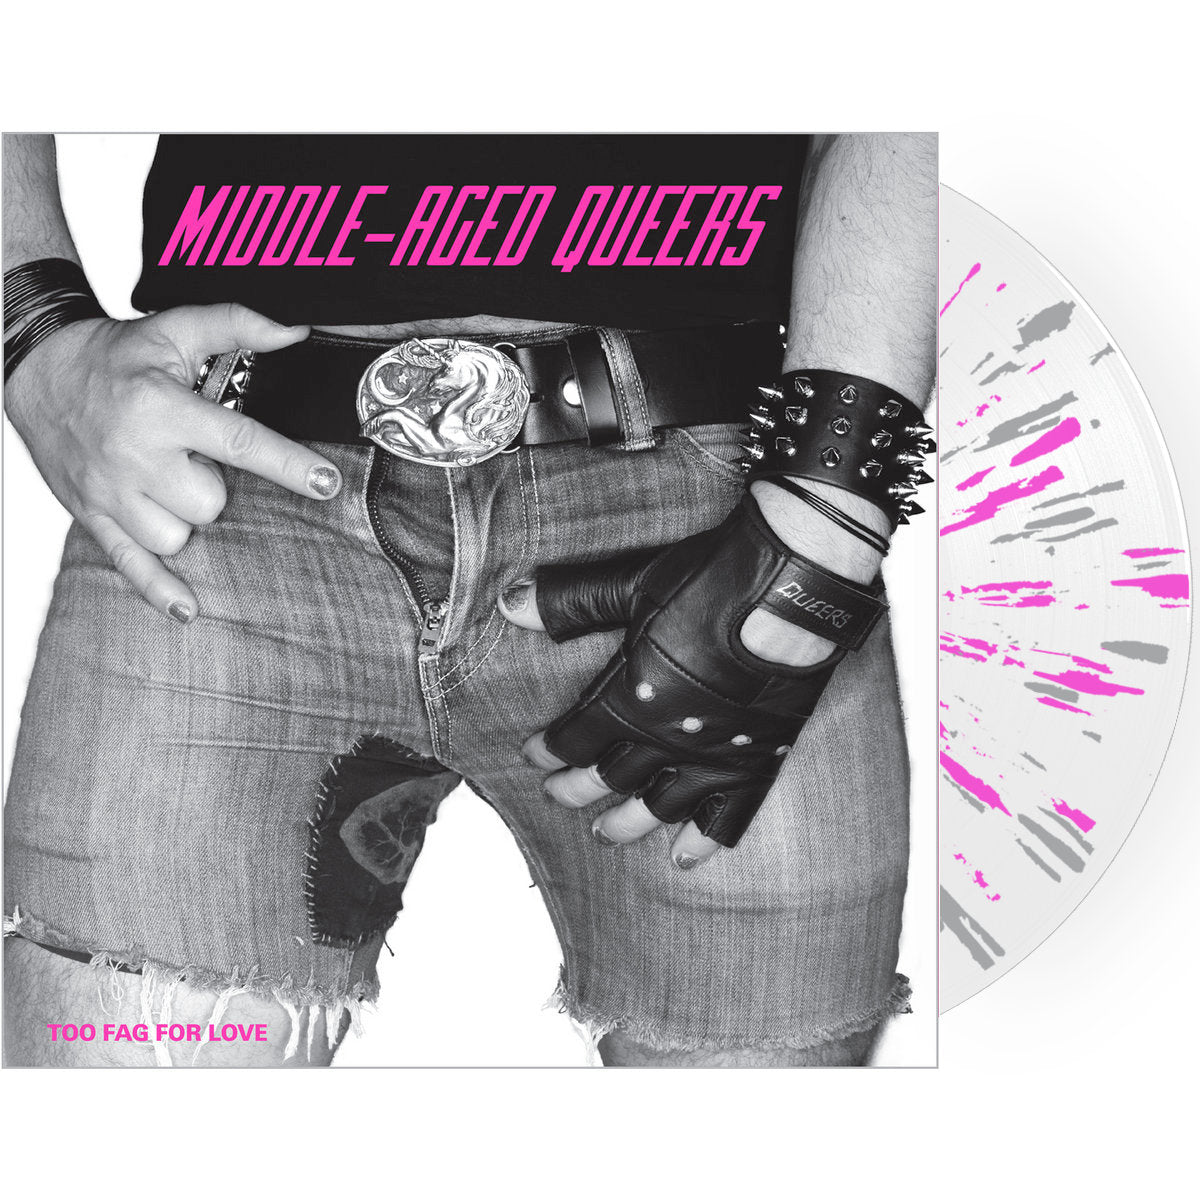 Middle-Age Queers - "Too Fag For Love" 10" (White w/ Silver & Pink Splatter)